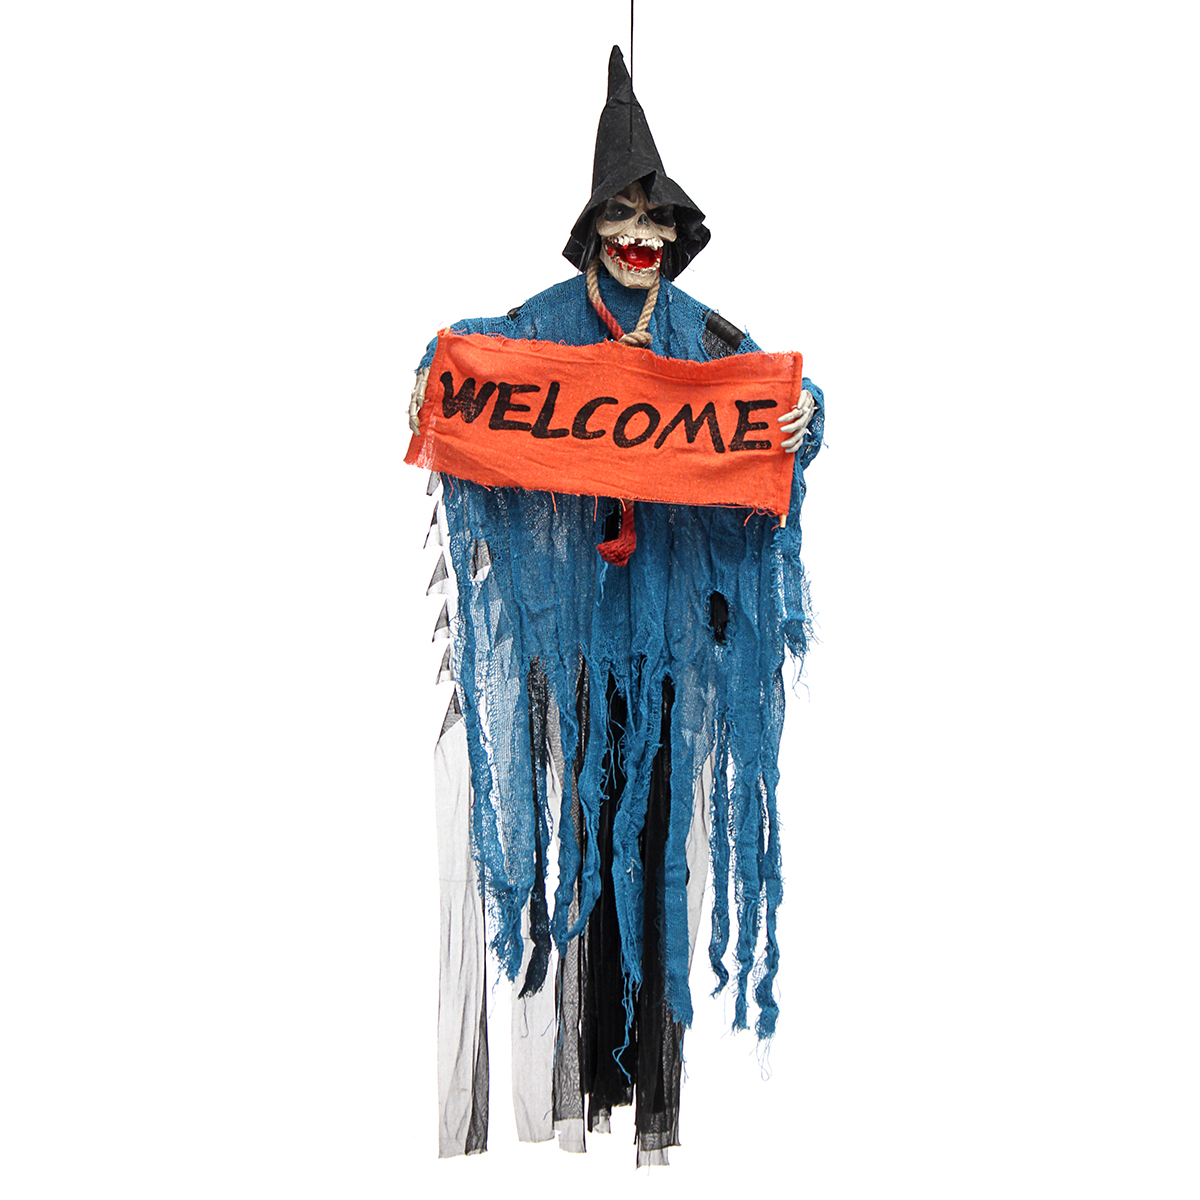 Halloween-Tools-Scary-Welcome-Sign-Hanging-Skeleton-Voice-Lights-Eyes-for-Halloween-Decorations-1340873-7